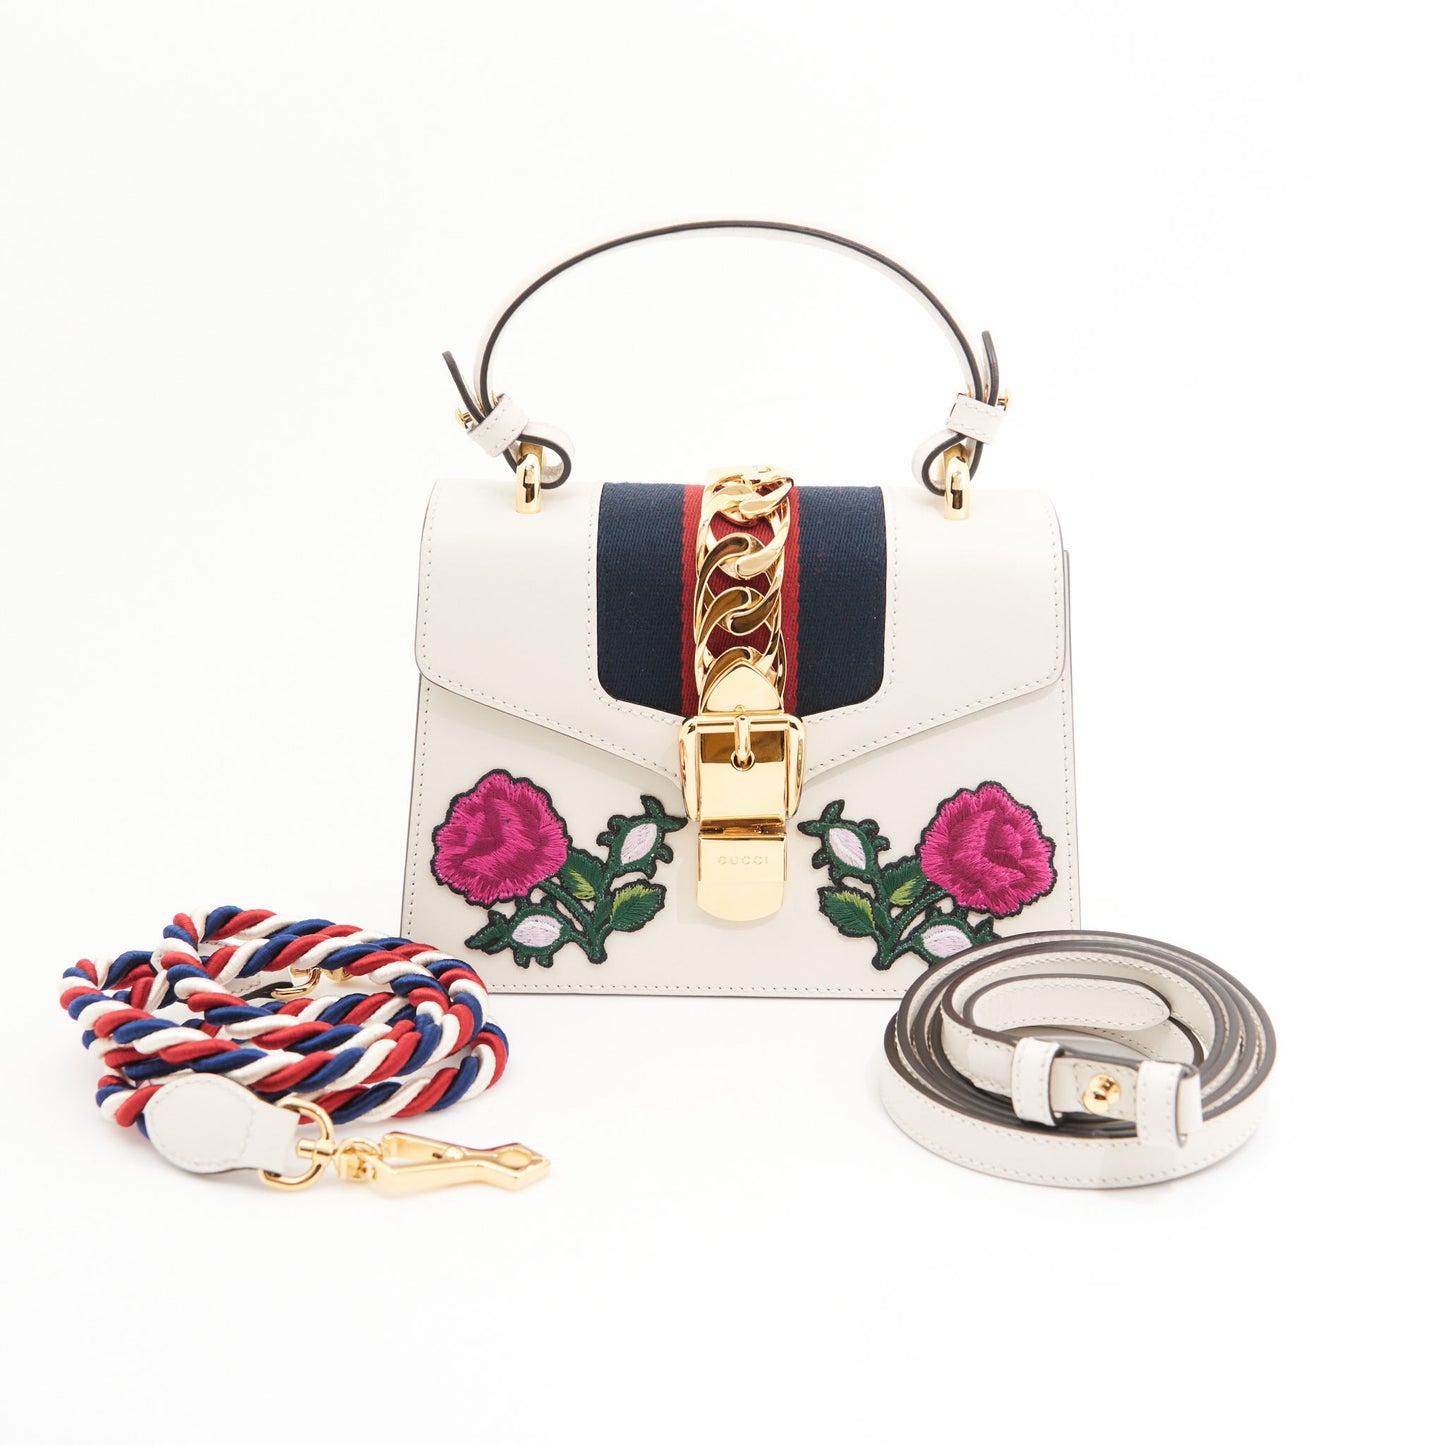 Gucci Leather Sylvie Small Floral Embroidered Handbag in White GHW